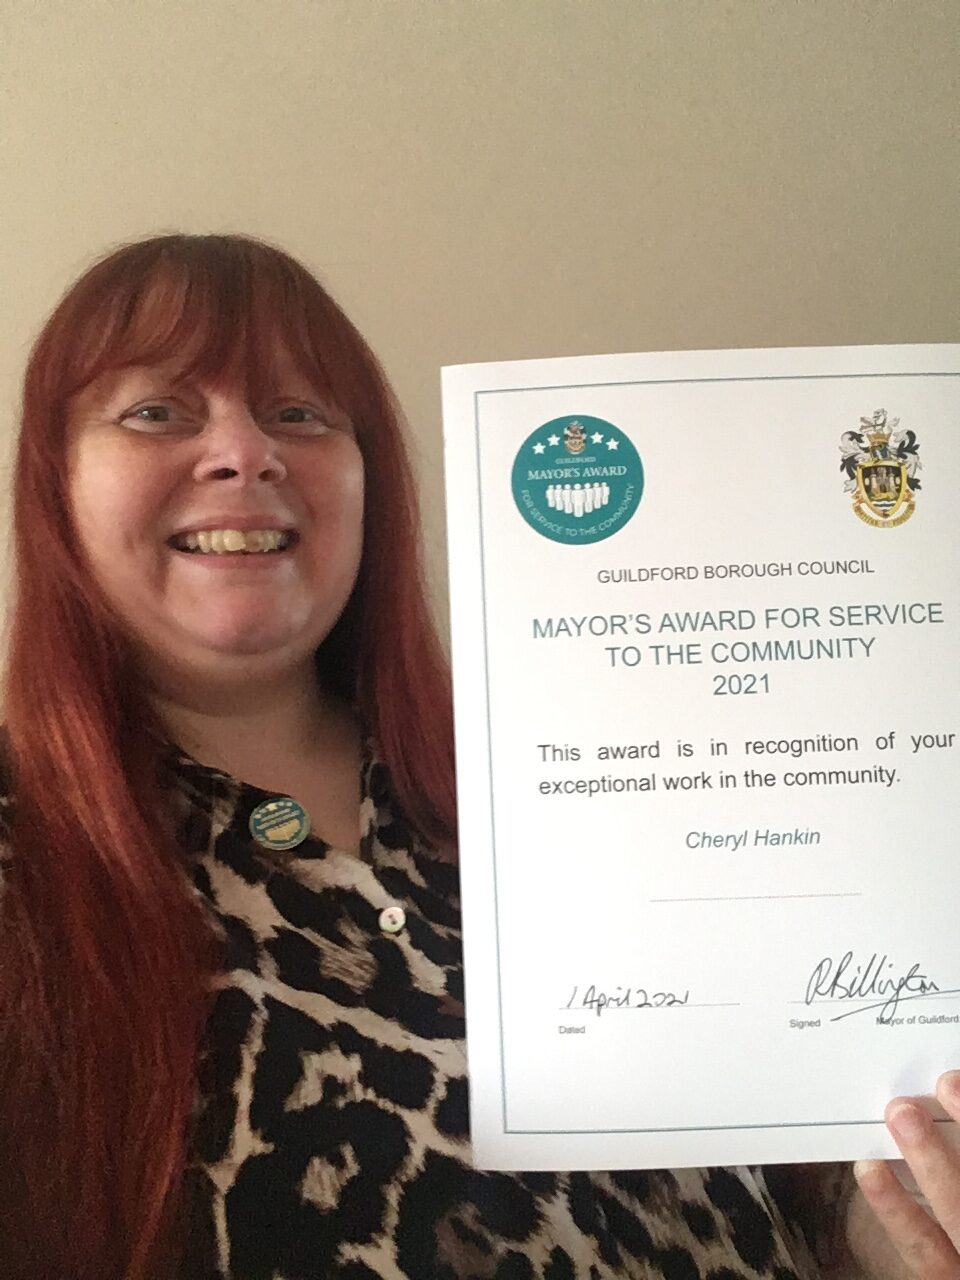 Image of Cheryl Hankin, who runs CTK Recycling, with the certificate for the Major's Award for service to the community which she received in 2021